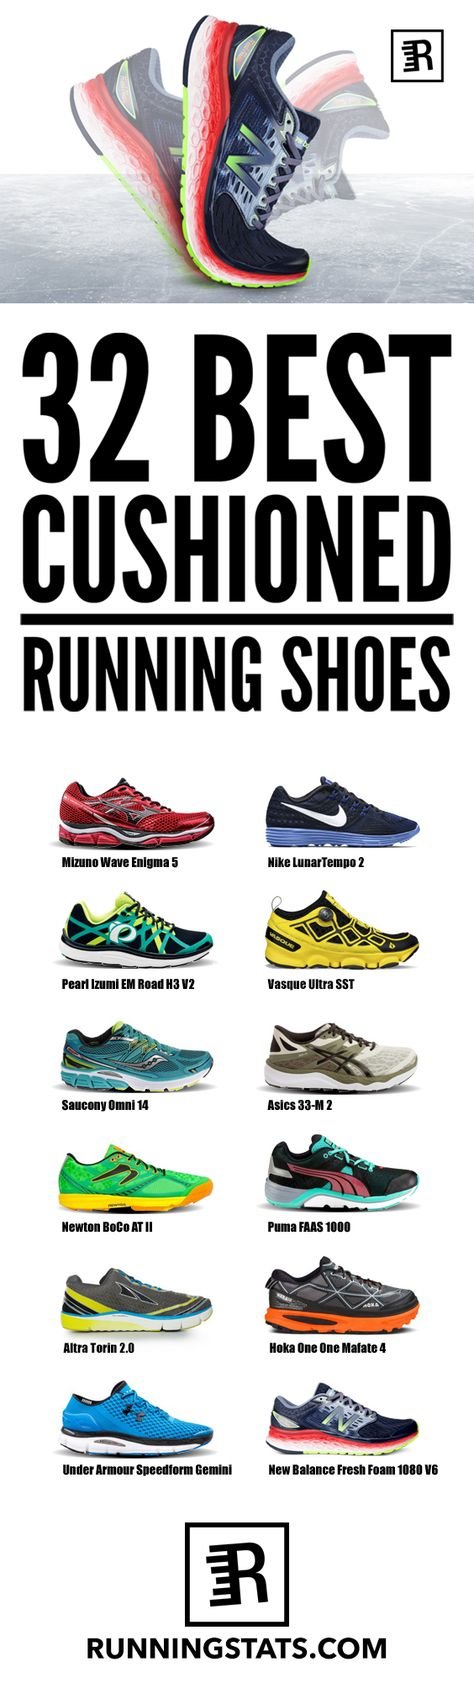 best cushioned running shoes